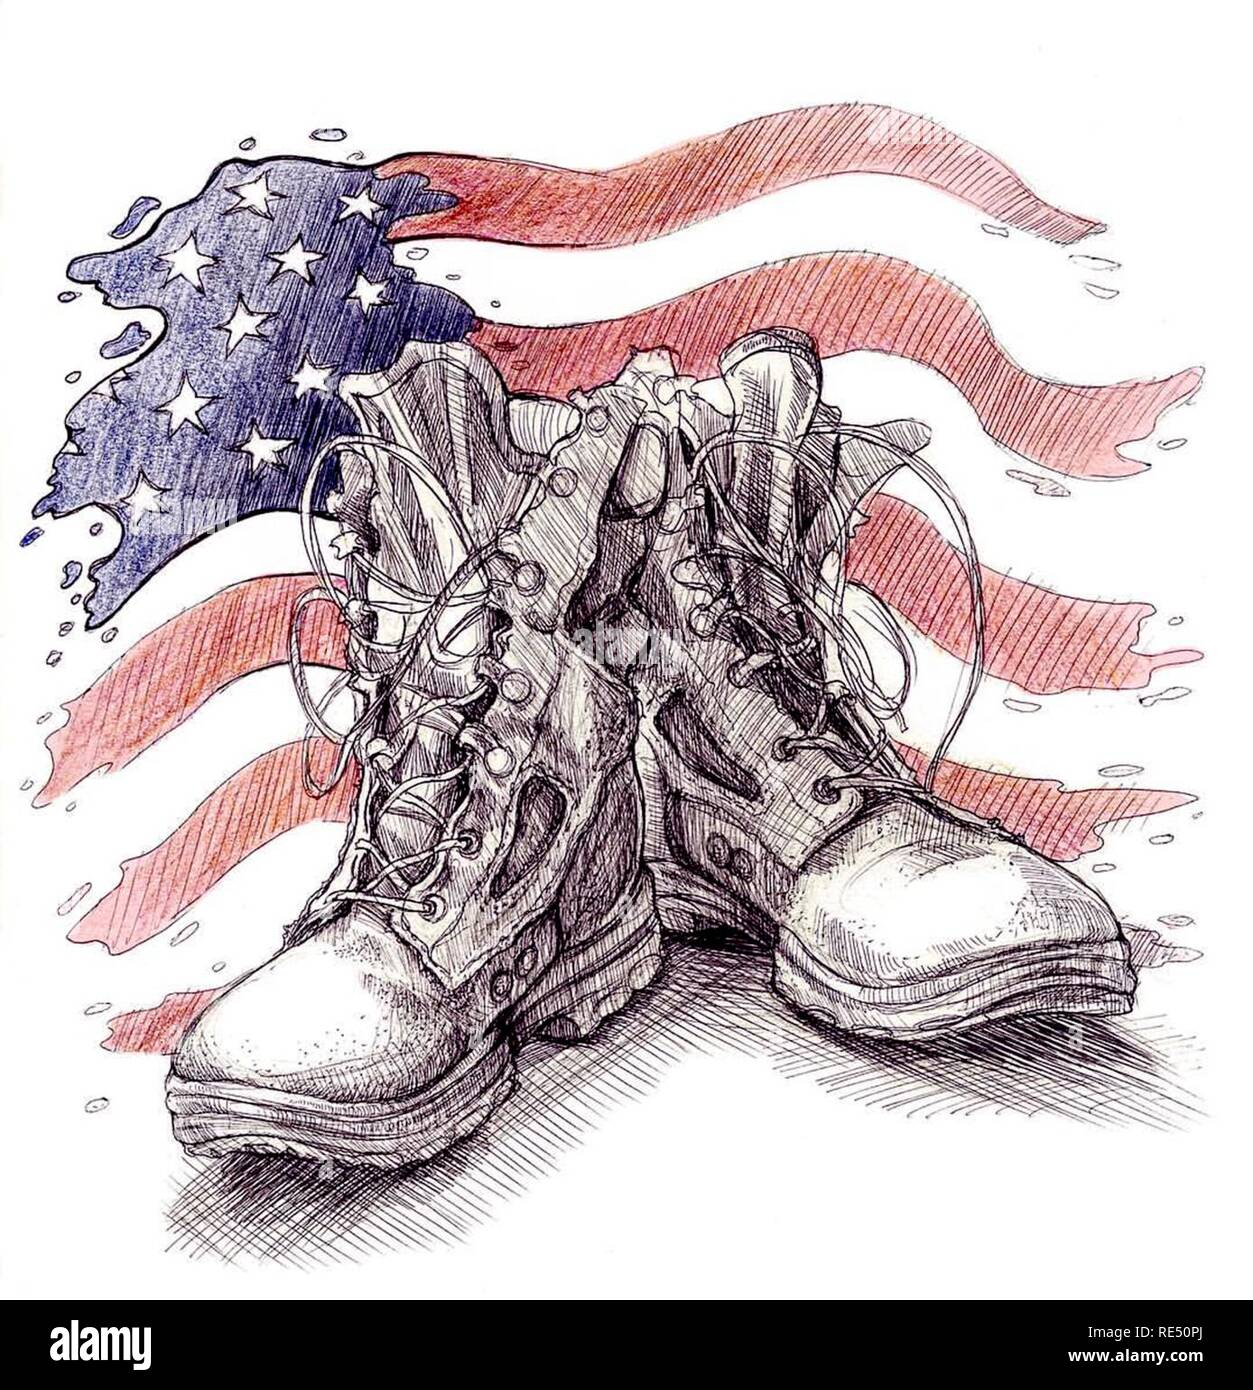 The illustration helped bring awareness to Veterans Day and to honor the military men and women who have worn the uniform in service of our country. Stock Photo